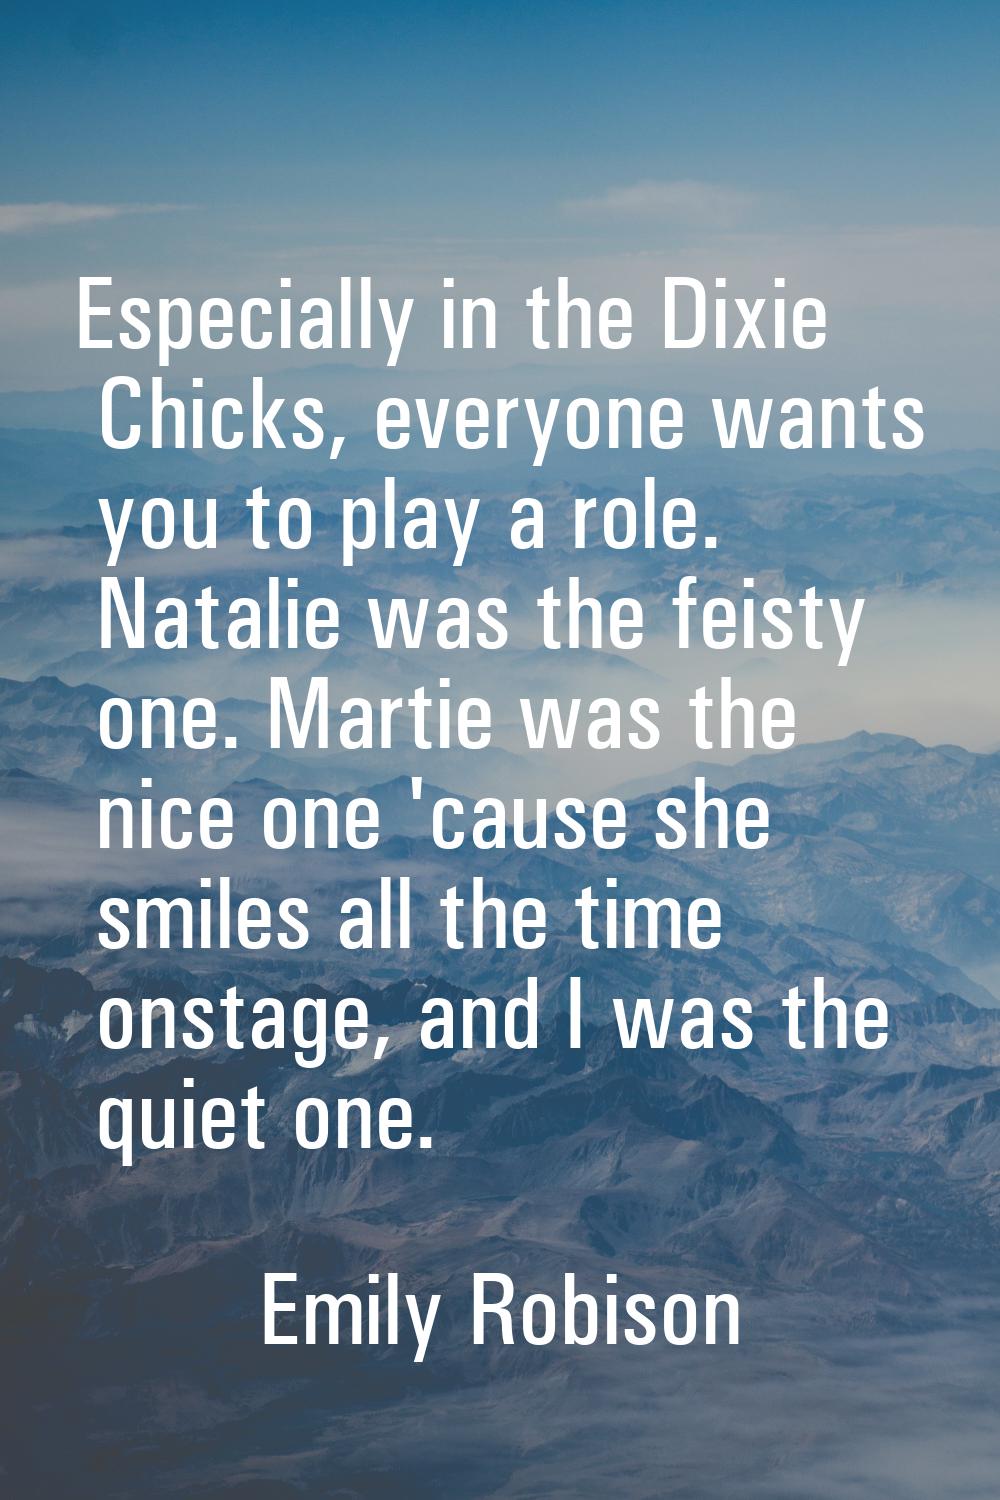 Especially in the Dixie Chicks, everyone wants you to play a role. Natalie was the feisty one. Mart